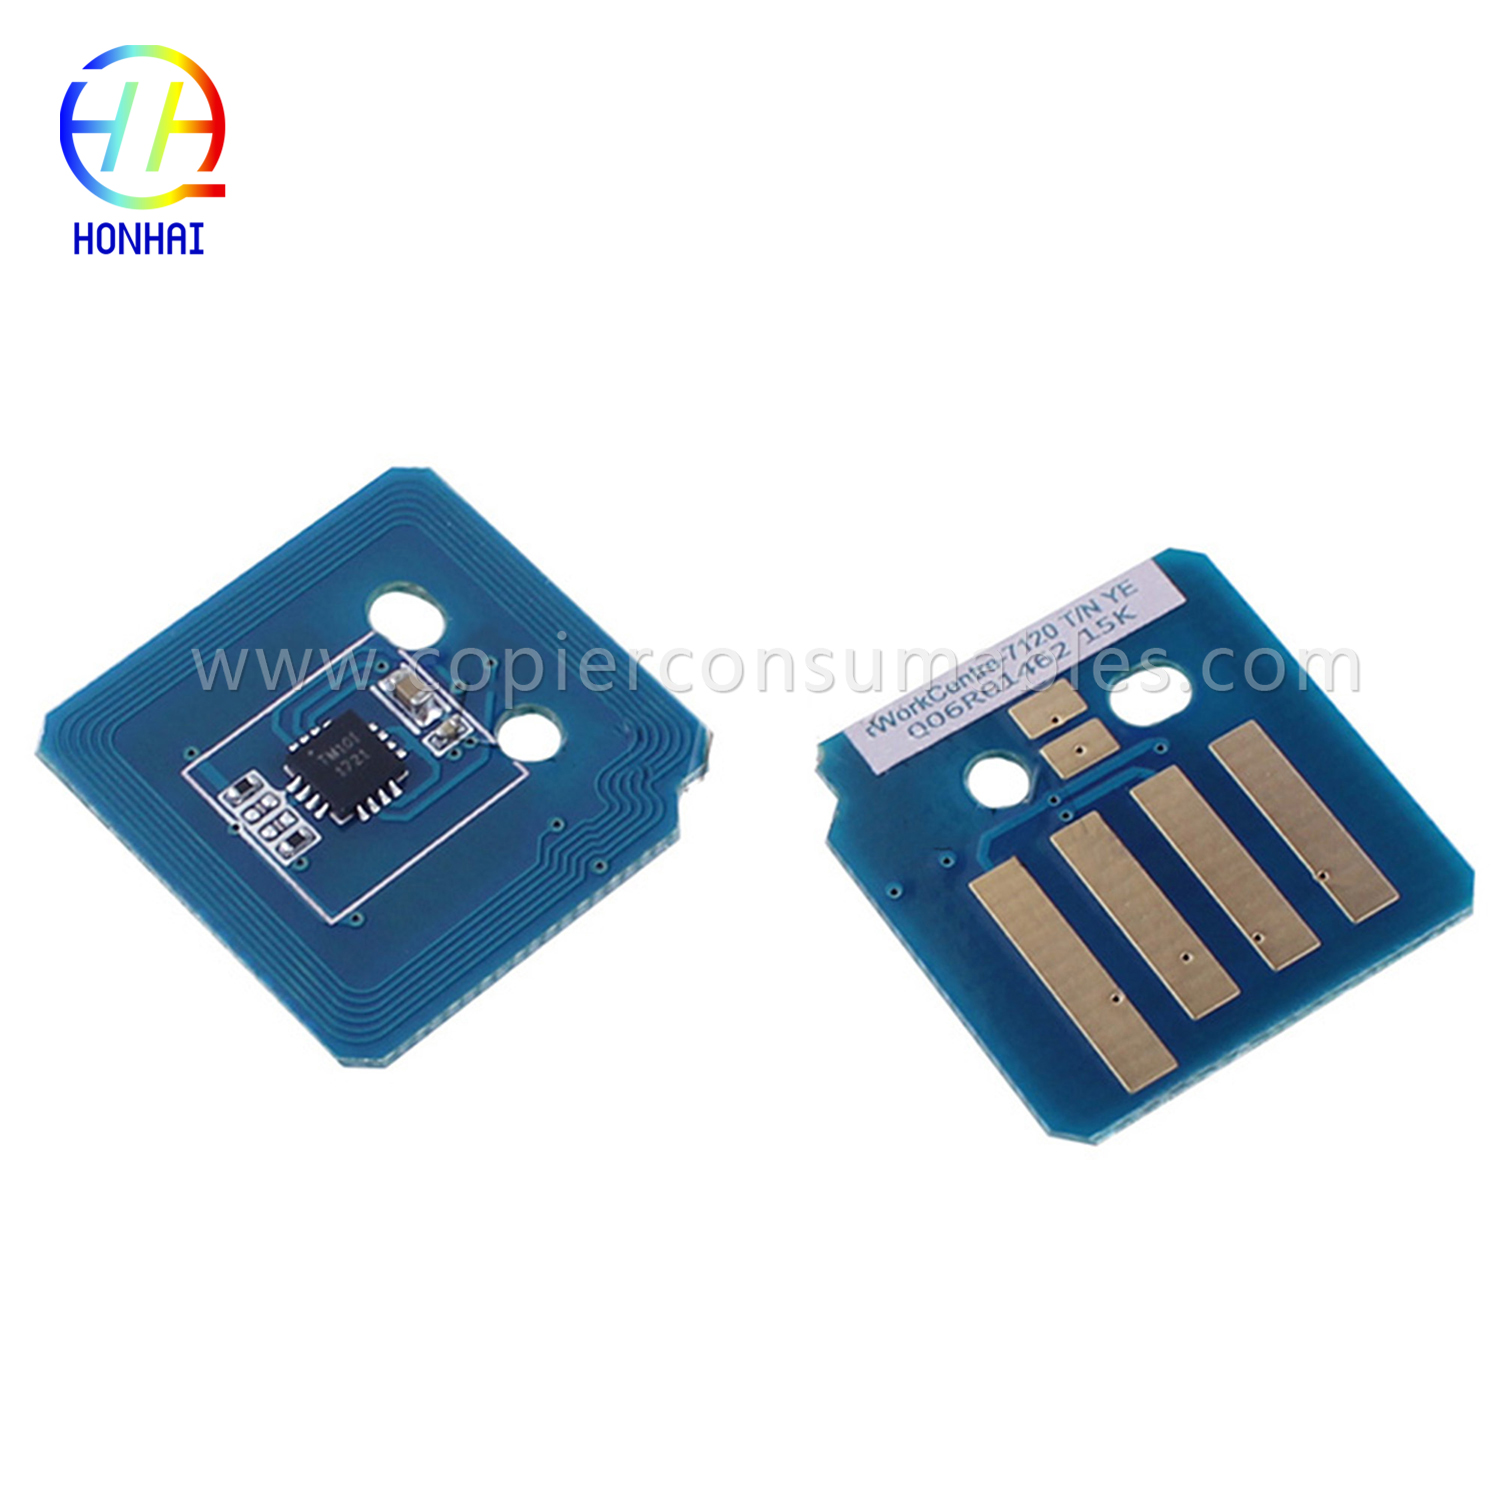 Toner Chip ho an'ny Xerox Workcentre 7120 7125 7220 7225 (006R01461 006R01462 006R01463 006R01464) (2) 拷贝